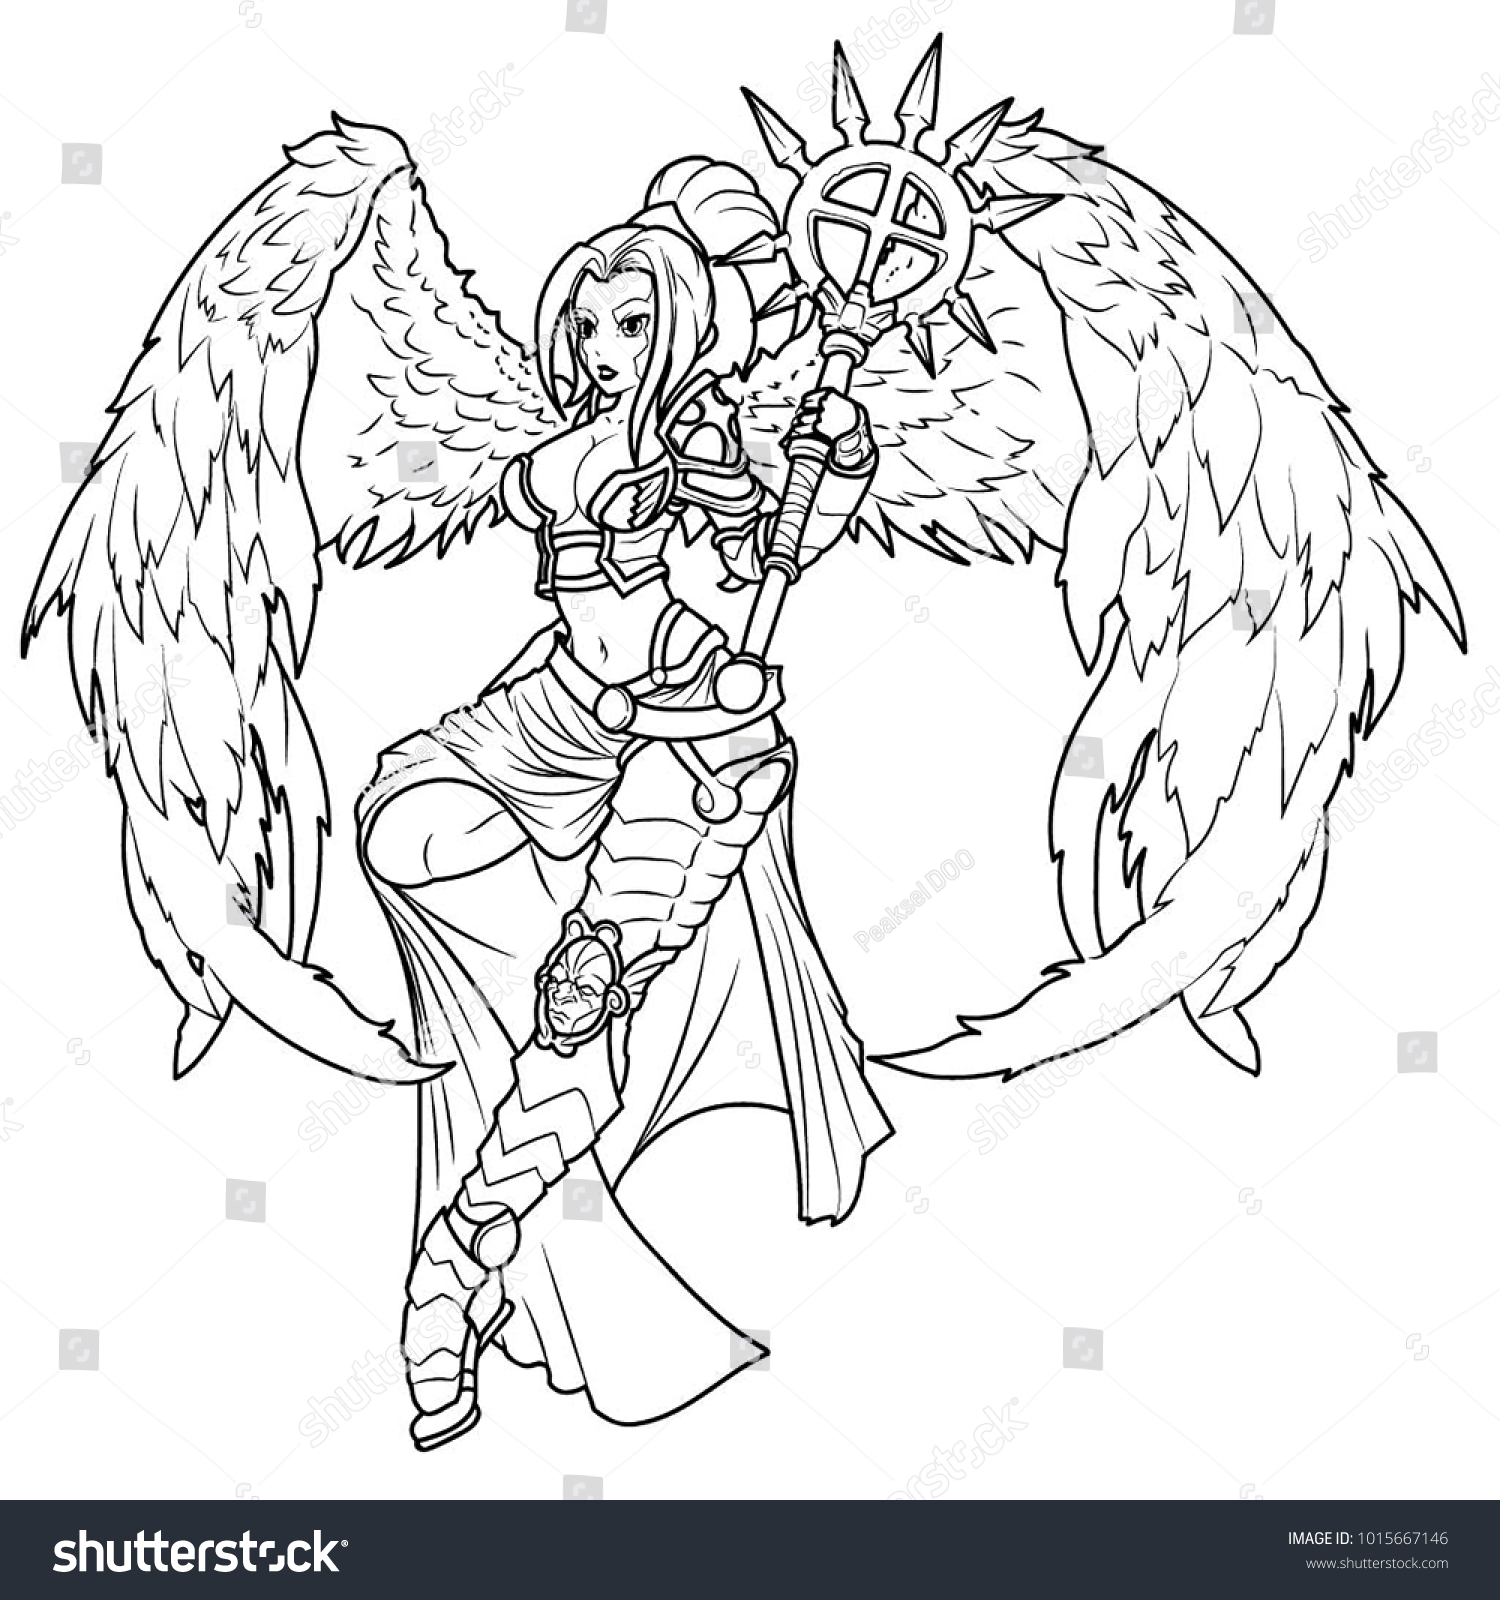 Pretty Flying Anime Warrior Girl Page Stock Illustration 20